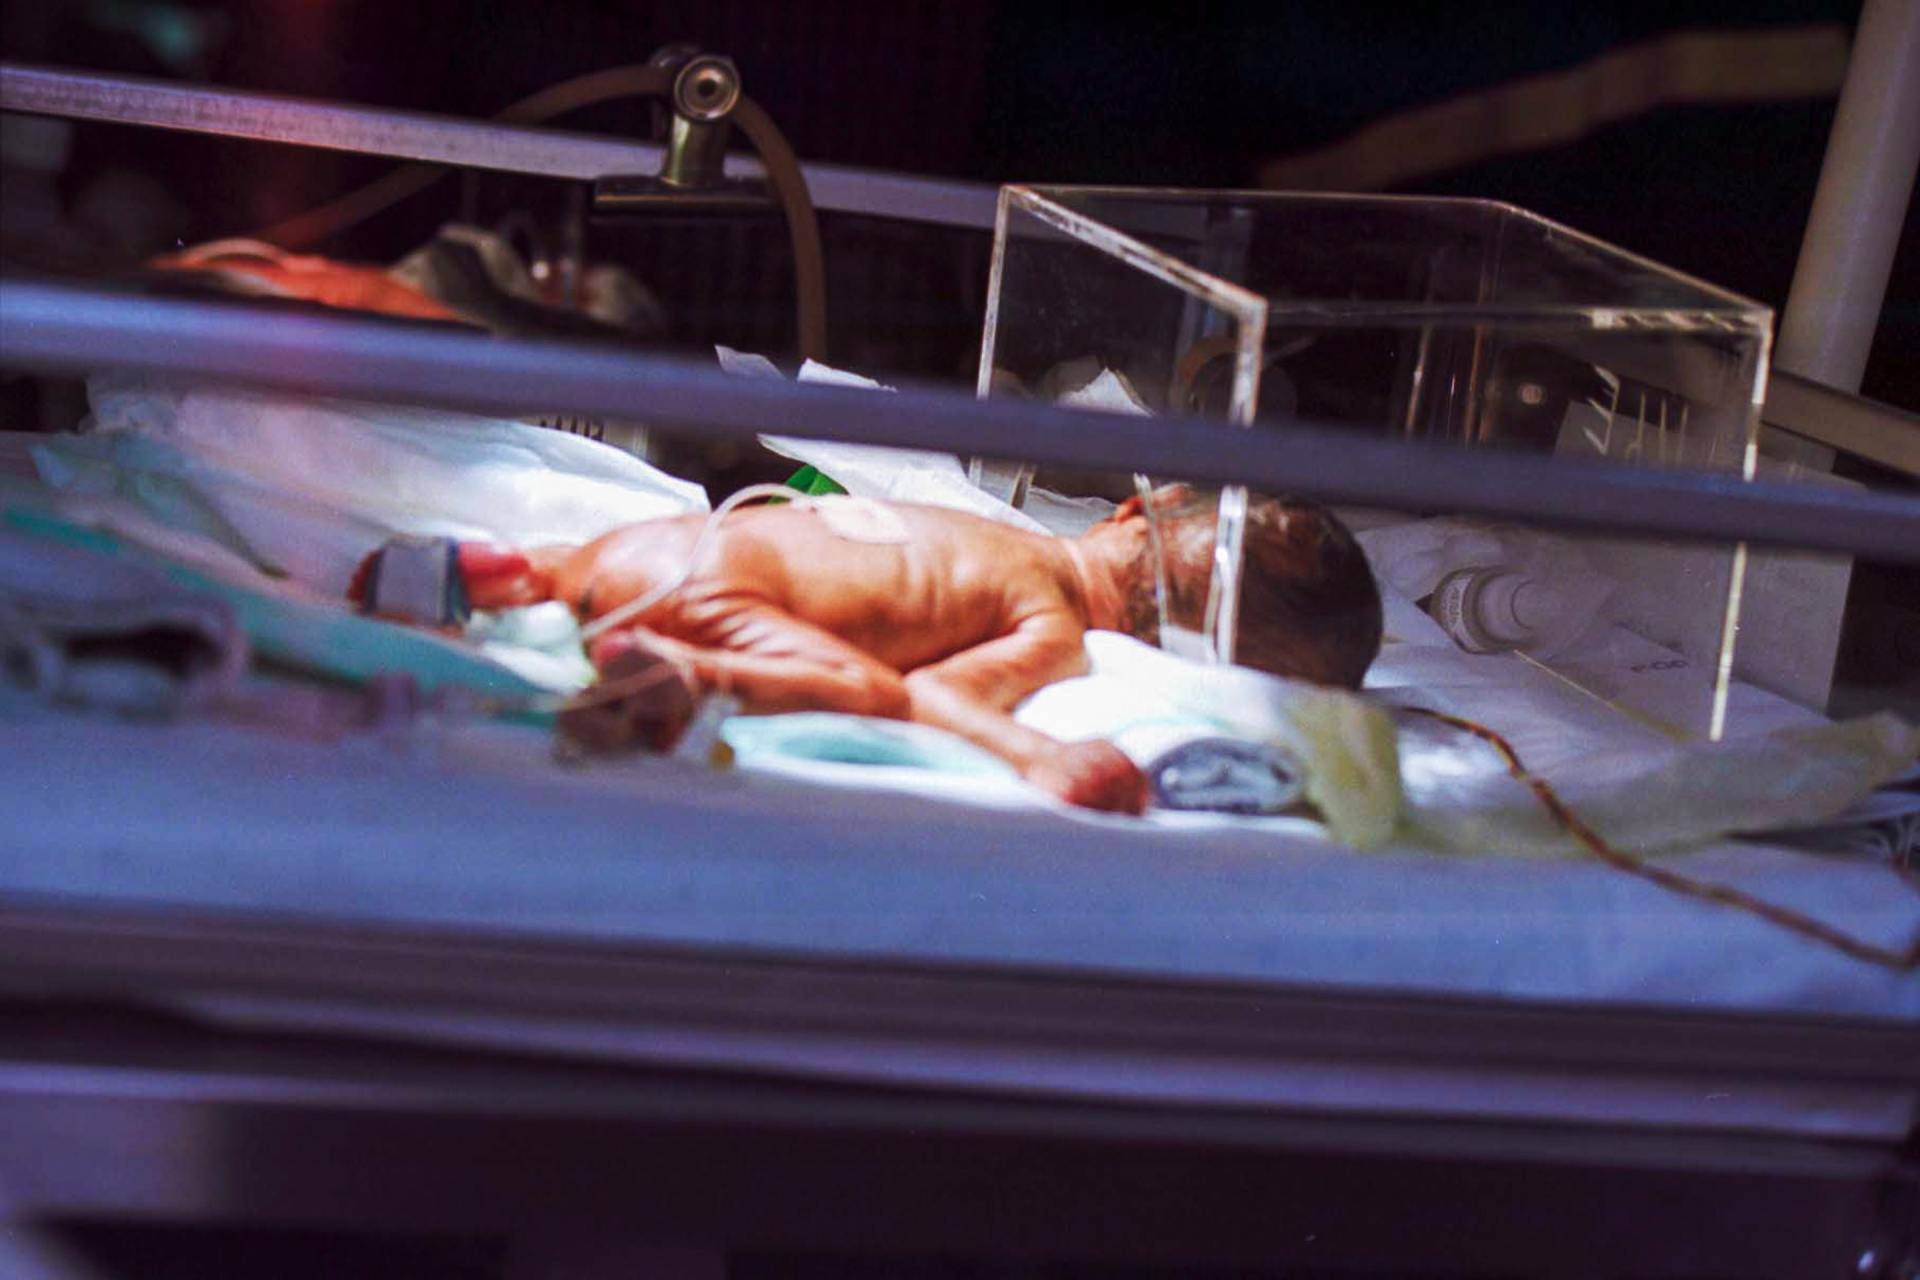 A baby is laying in an incubator in a hospital.